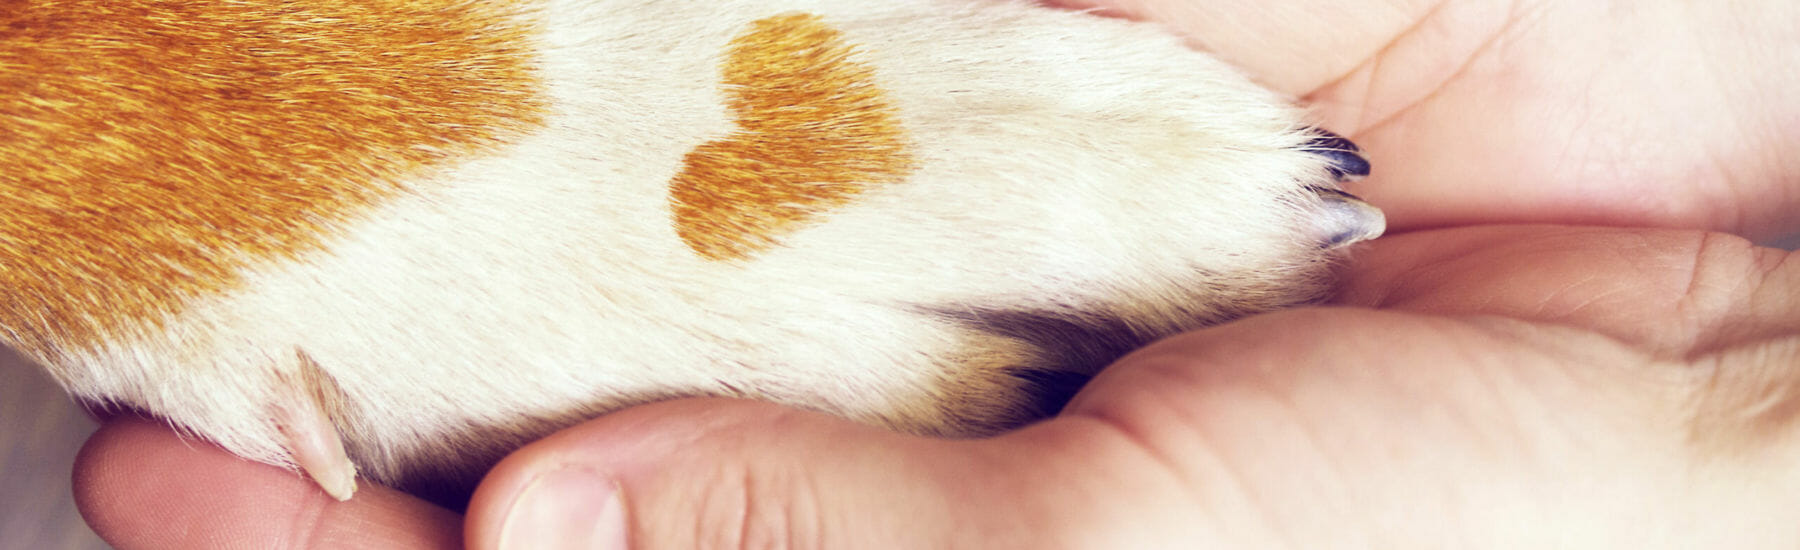 Human hands holding dog paw with a heart on the fur